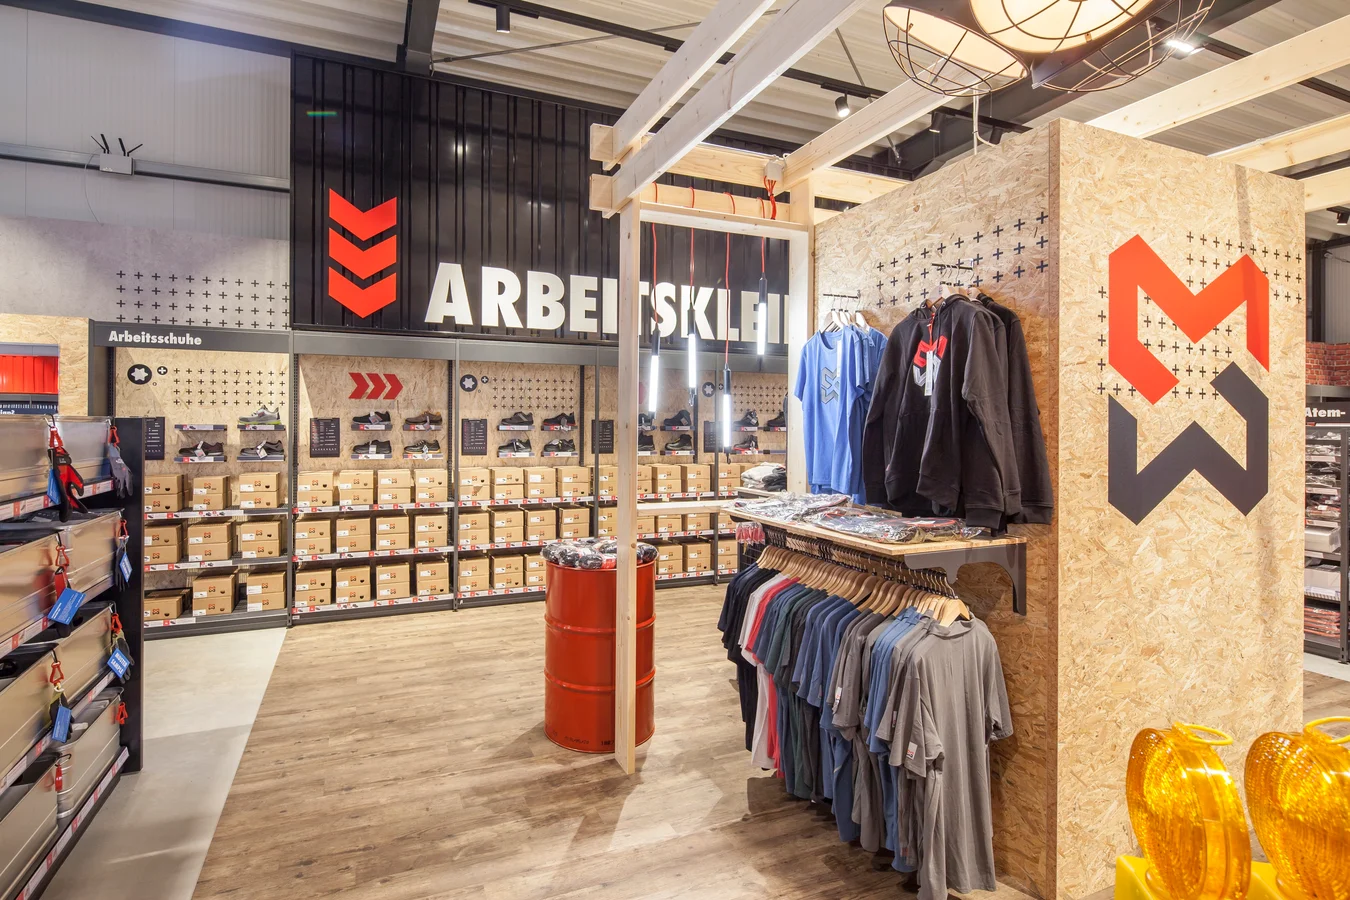 A new store is born – Würth and Wanzl present a new store